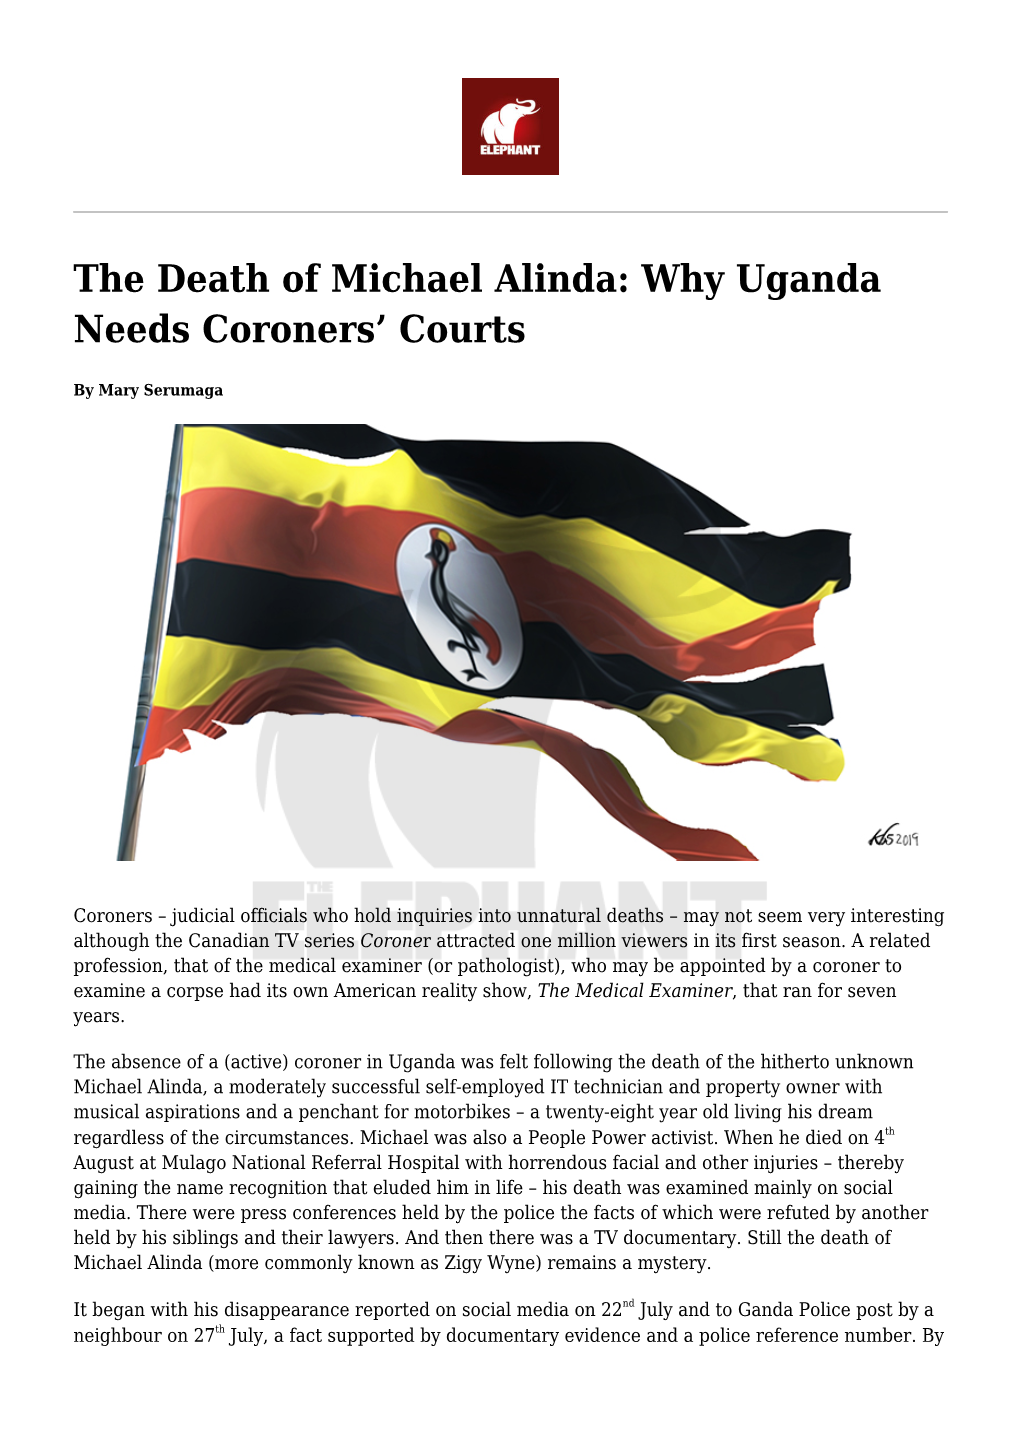 A Memoir of the Bush War and the Press in Uganda Provides an Insider’S View of the Ugandan Leader and His Movement